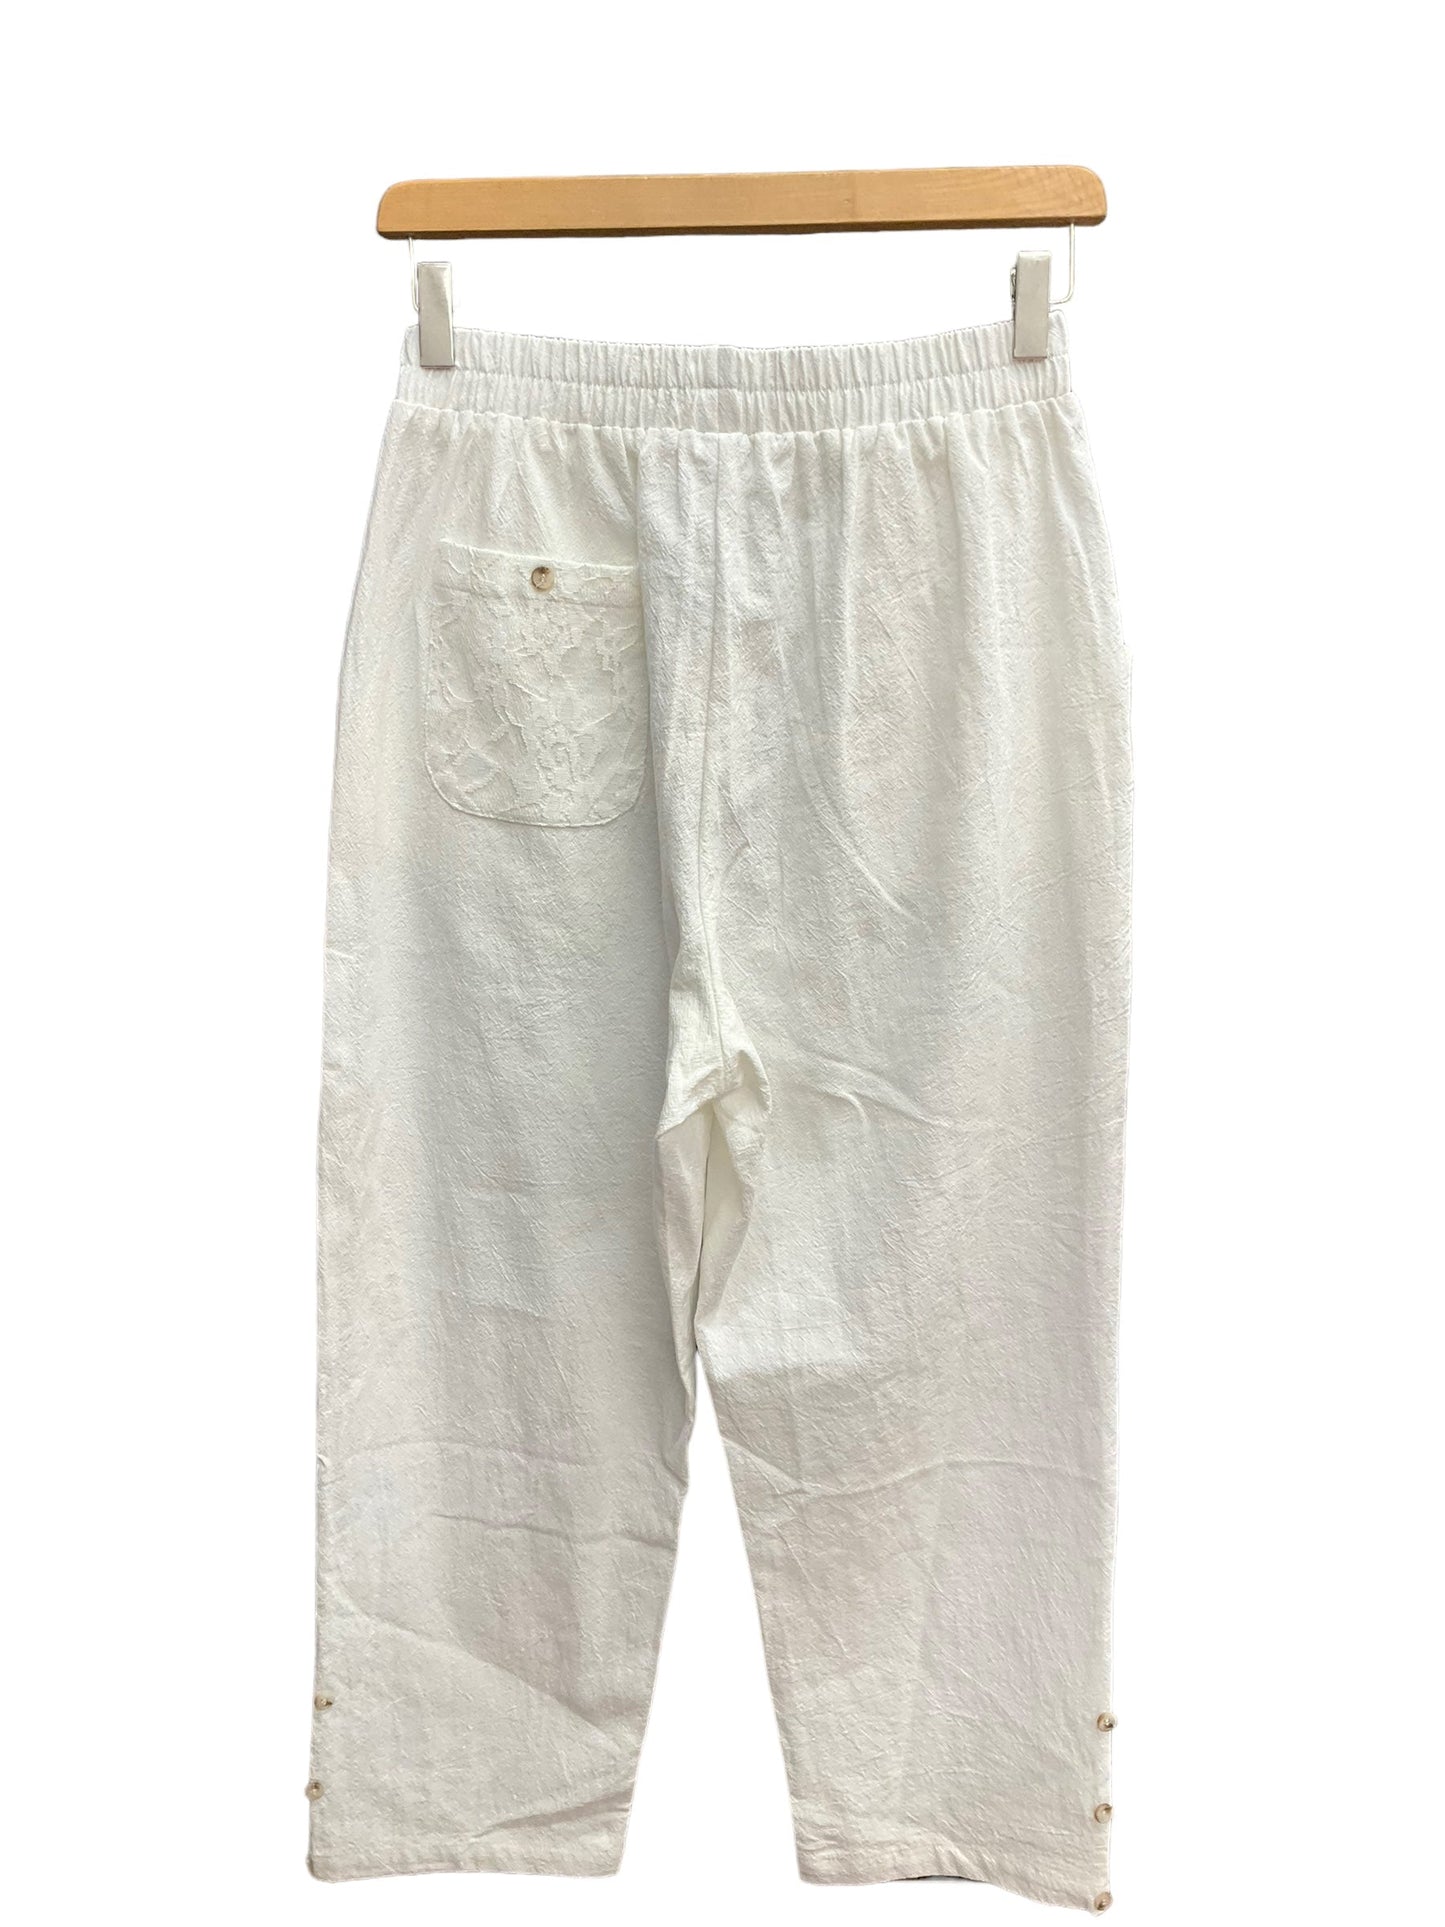 White Pants Other Clothes Mentor, Size 8